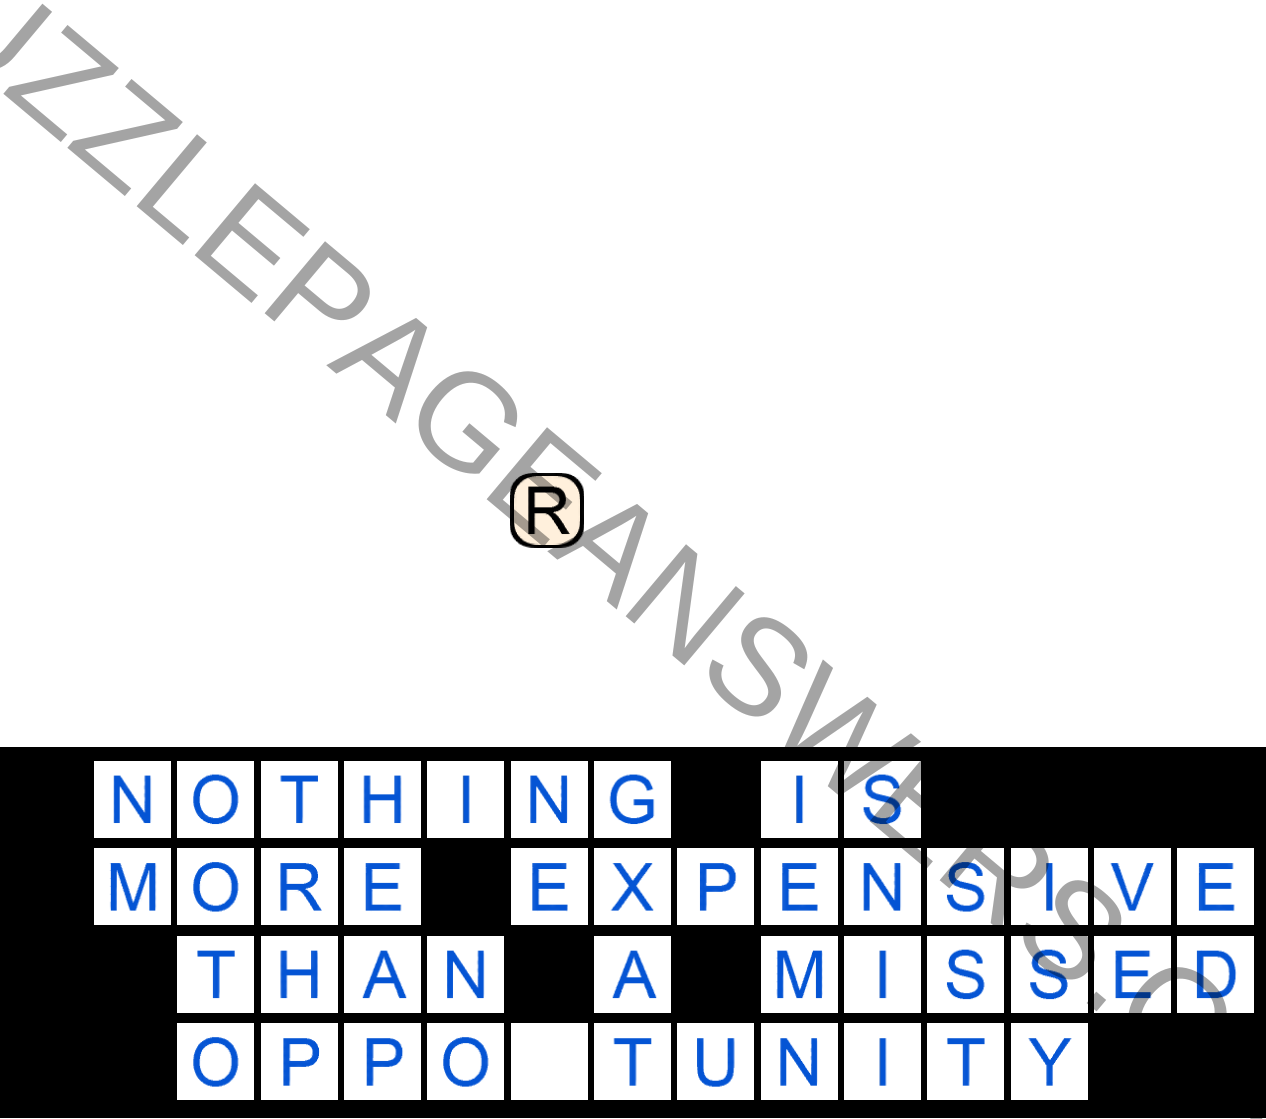 Puzzle Page Quote Slide February 25 2021 Answers Puzzle Page Answers